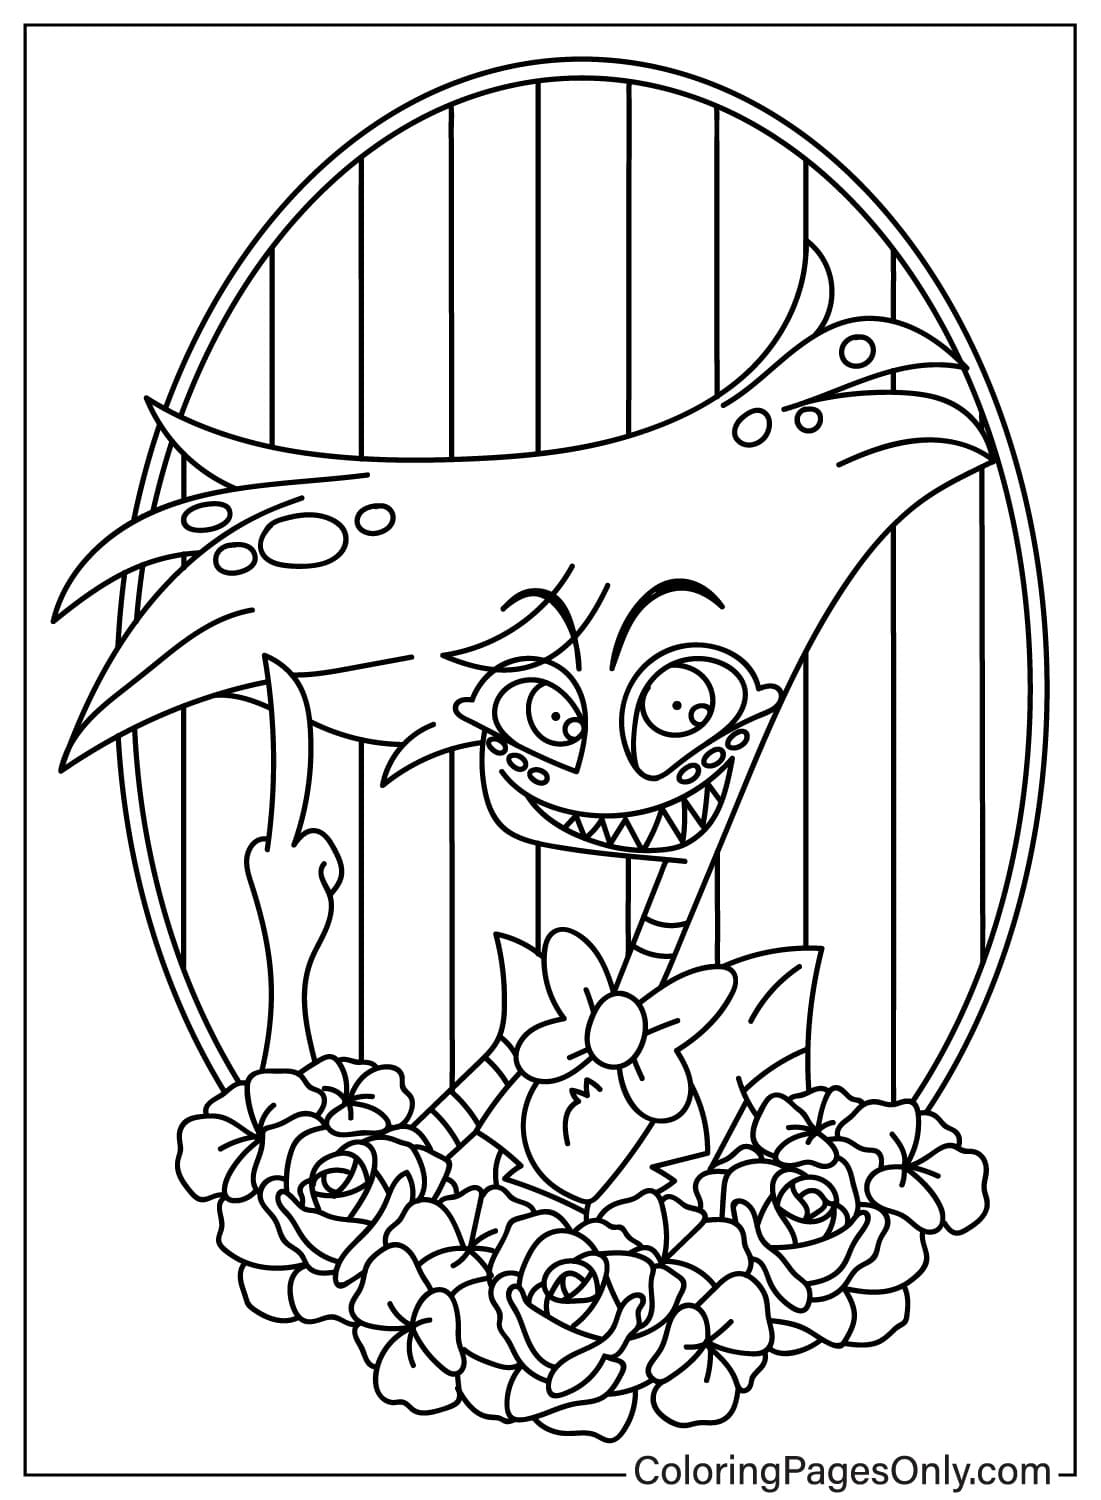 Angel Dust and Flower Coloring Page from Angel Dust